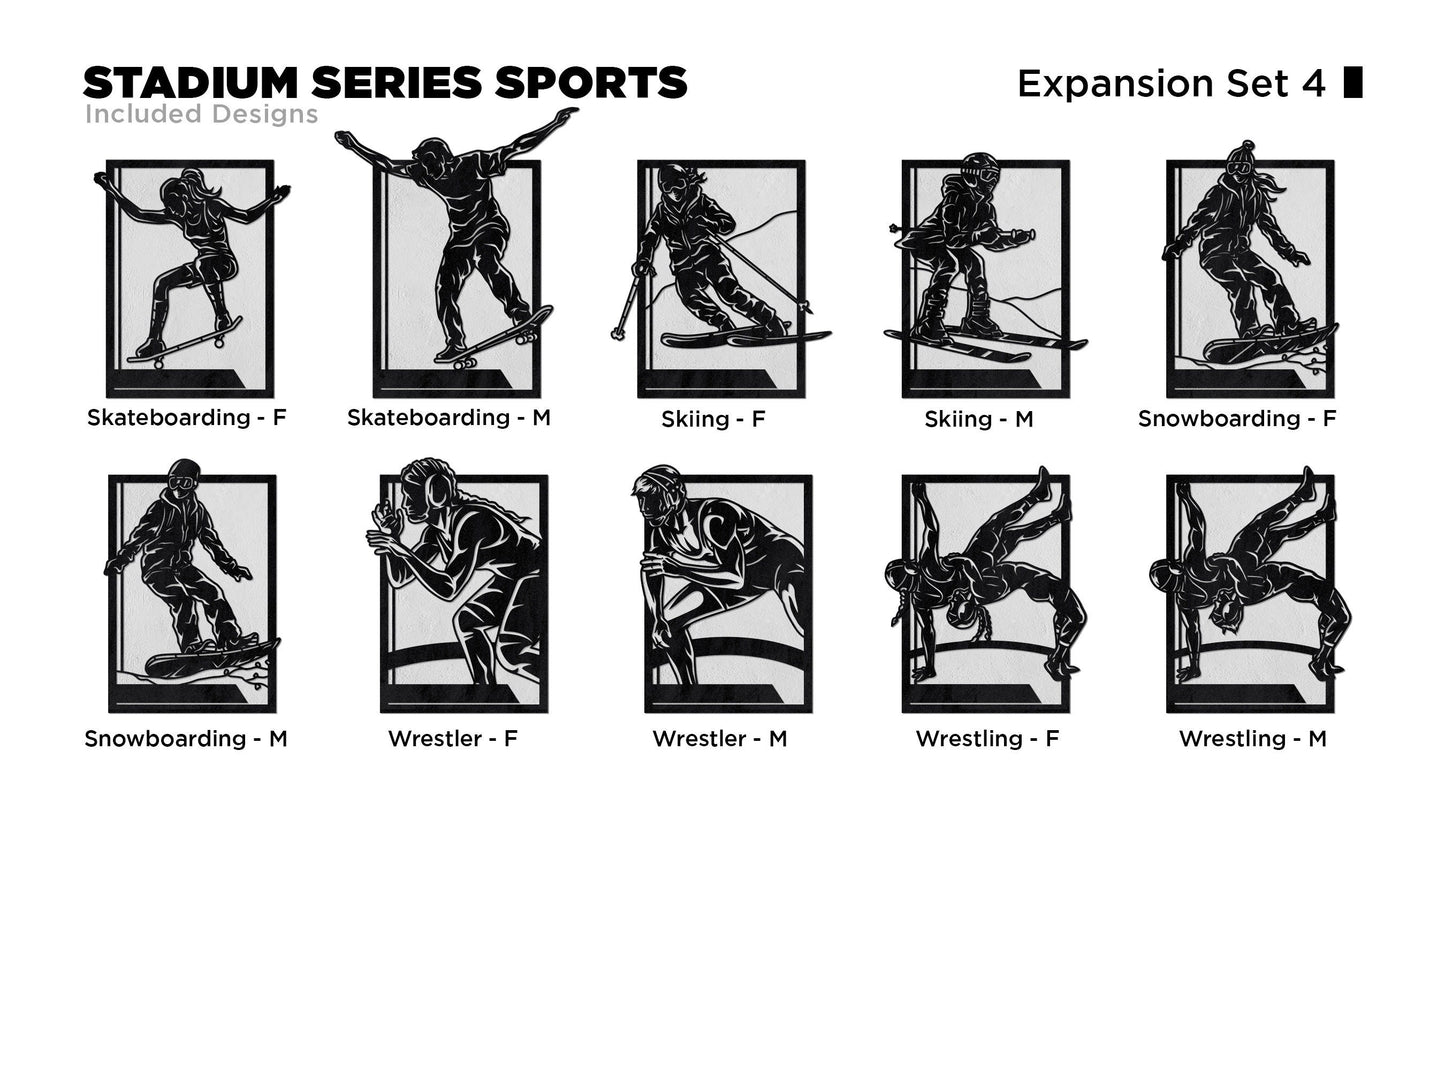 Stadium Series Sports Signage Expansion Set 4 - 25 Designs - SVG File Download - Sized for Glowforge